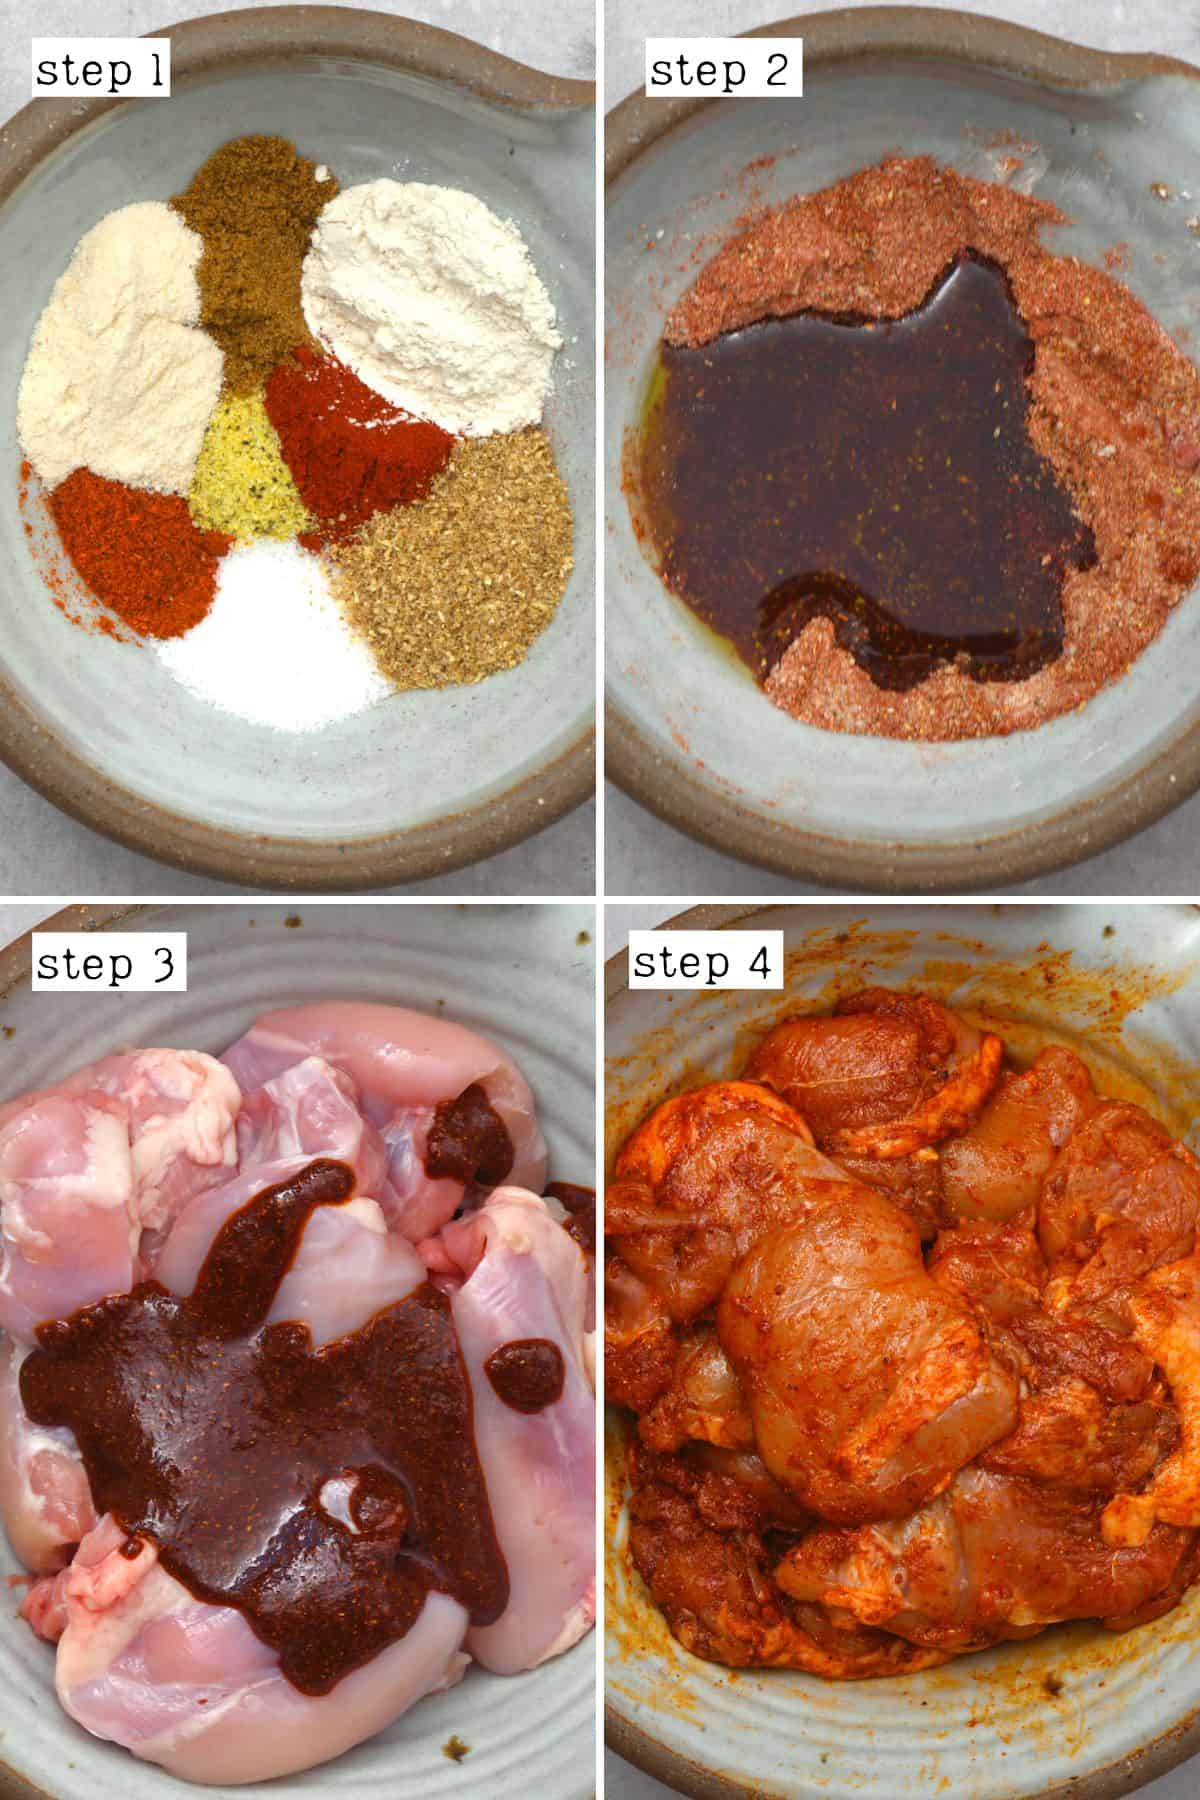 Steps for marinating chicken